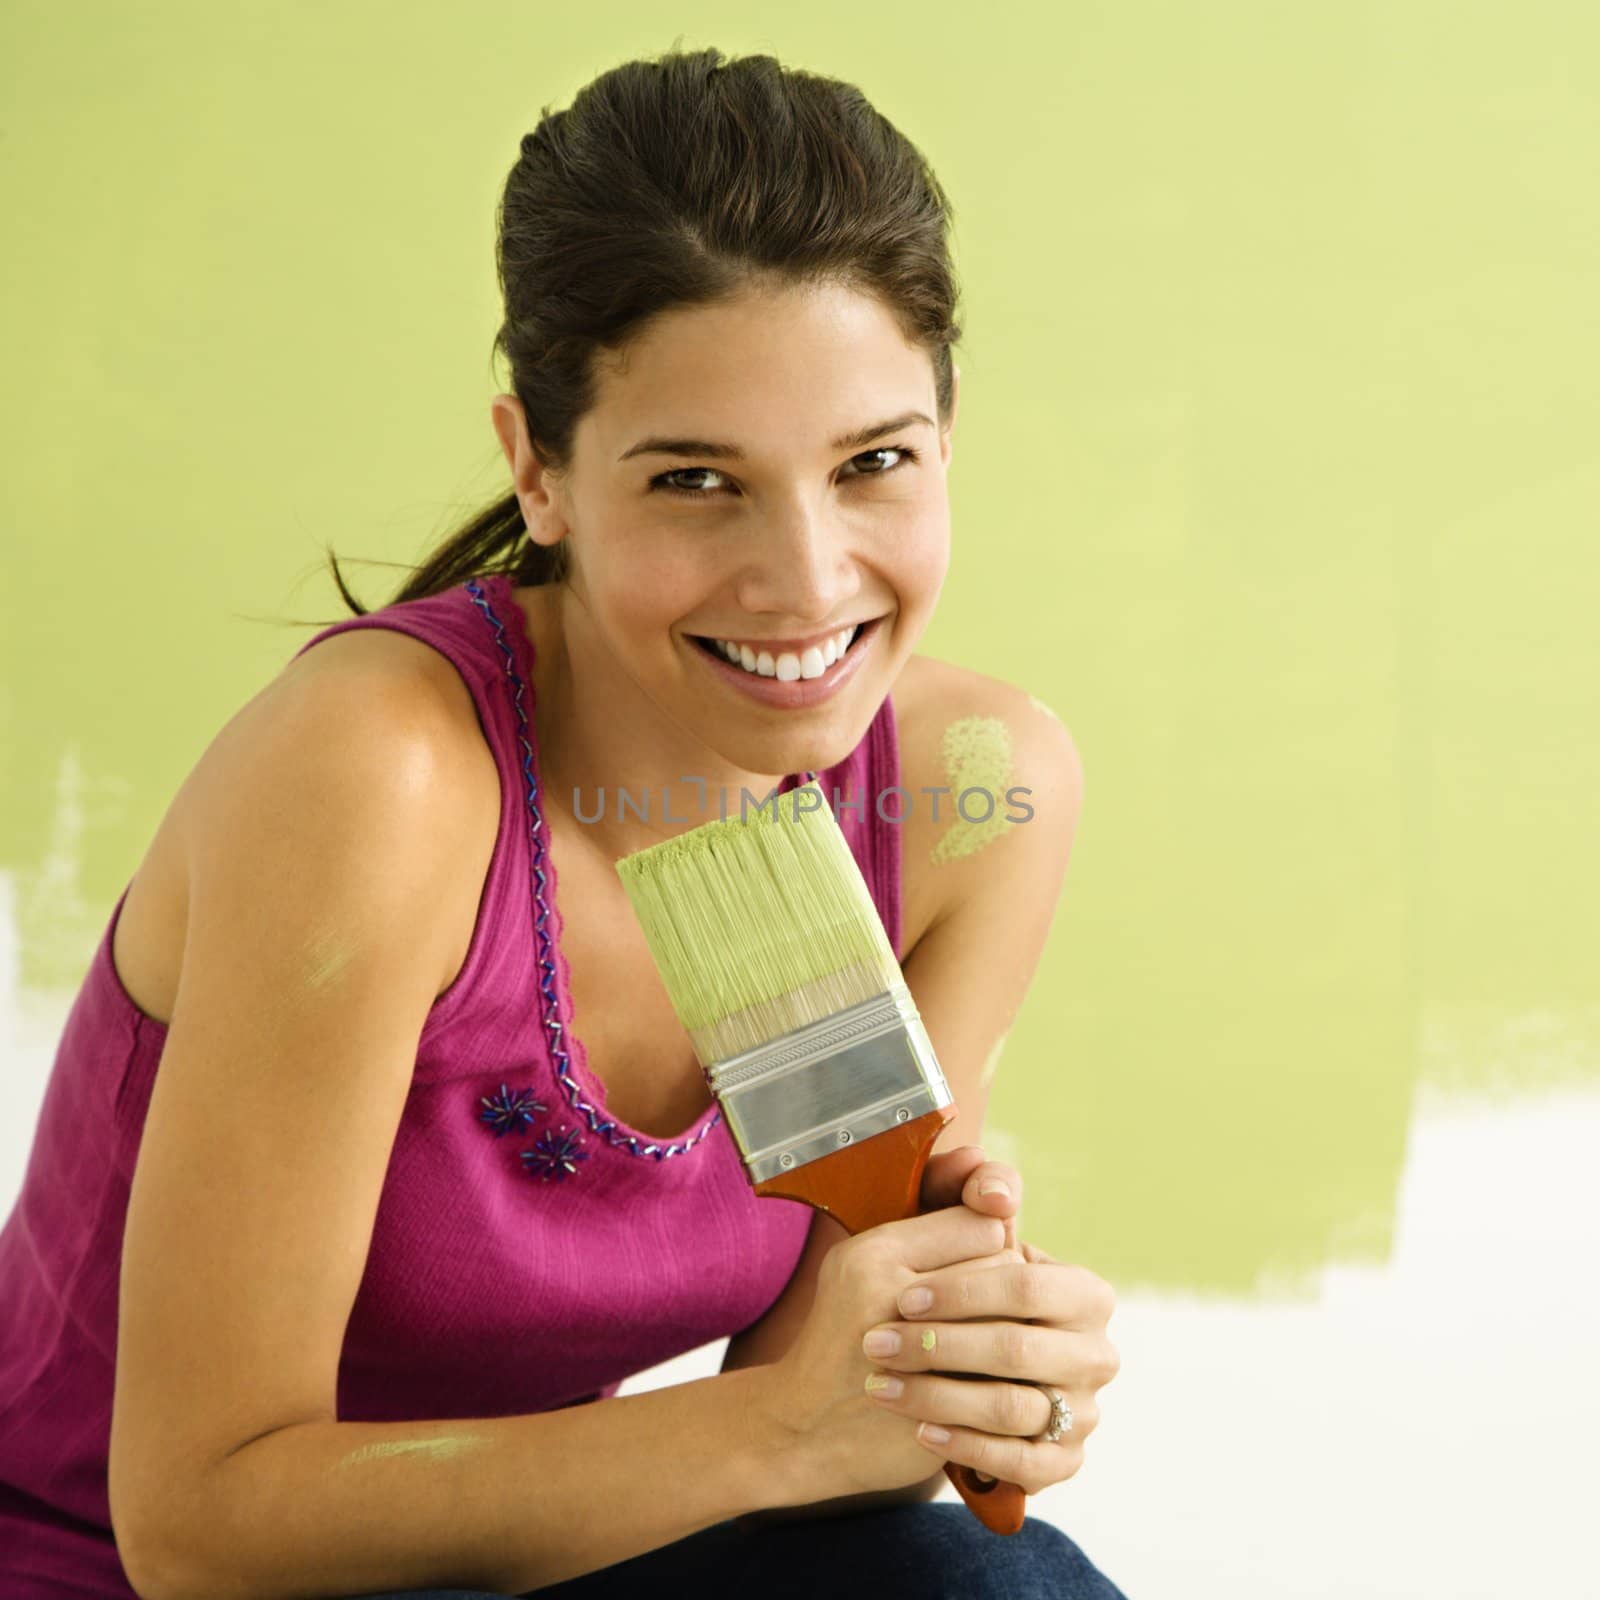 Pretty smiling woman kneeling in front of partially painted wall holding paintbrush.